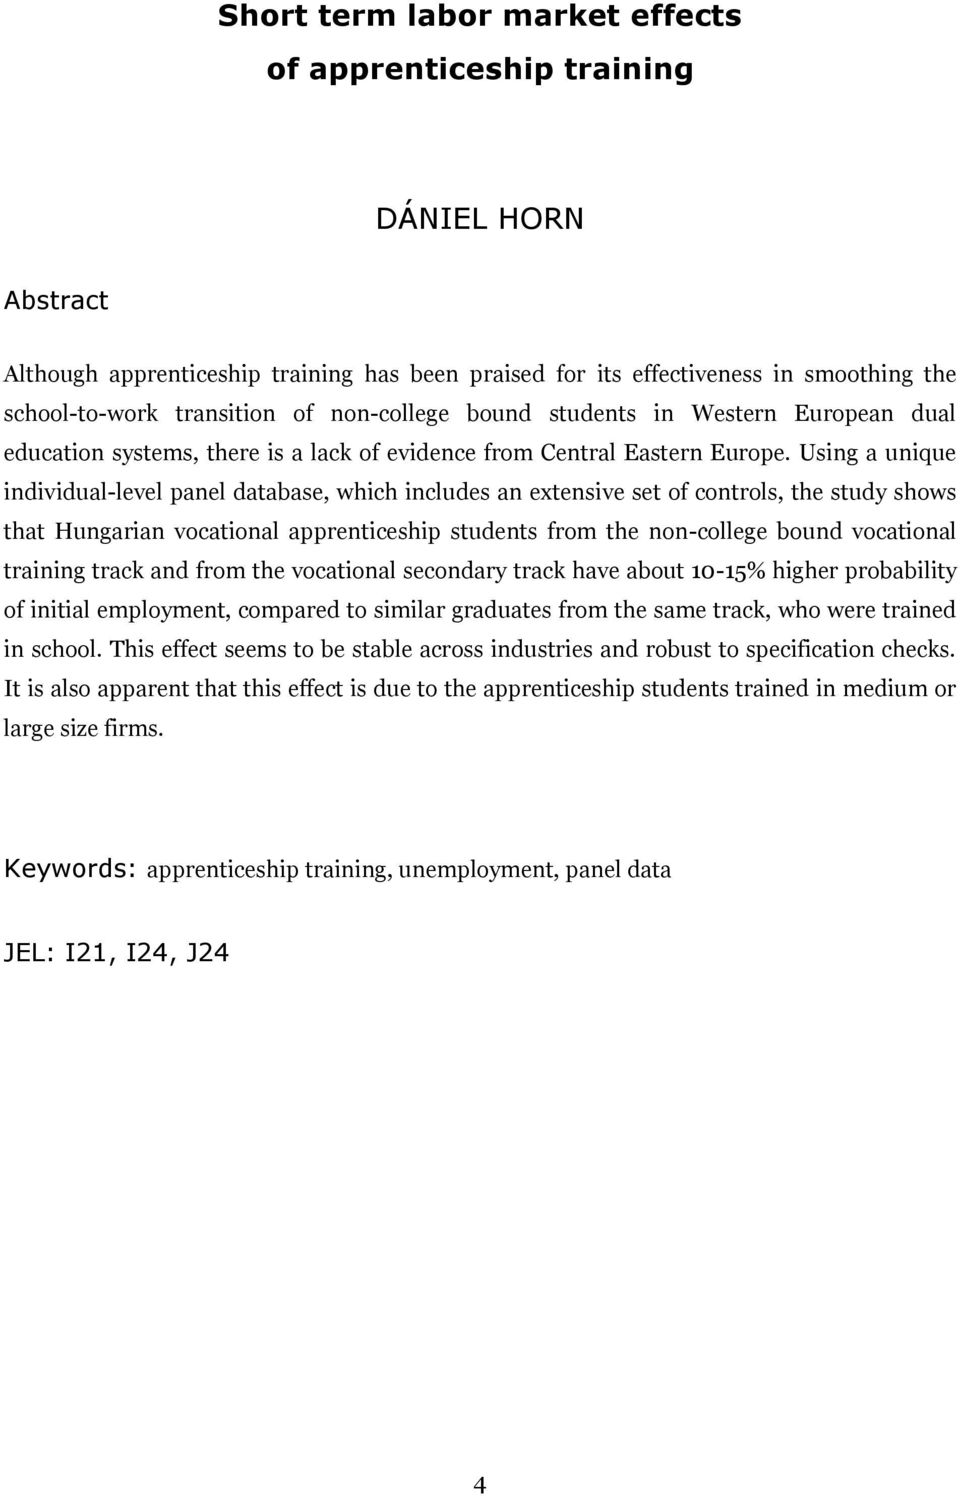 Using a unique individual-level panel database, which includes an extensive set of controls, the study shows that Hungarian vocational apprenticeship students from the non-college bound vocational